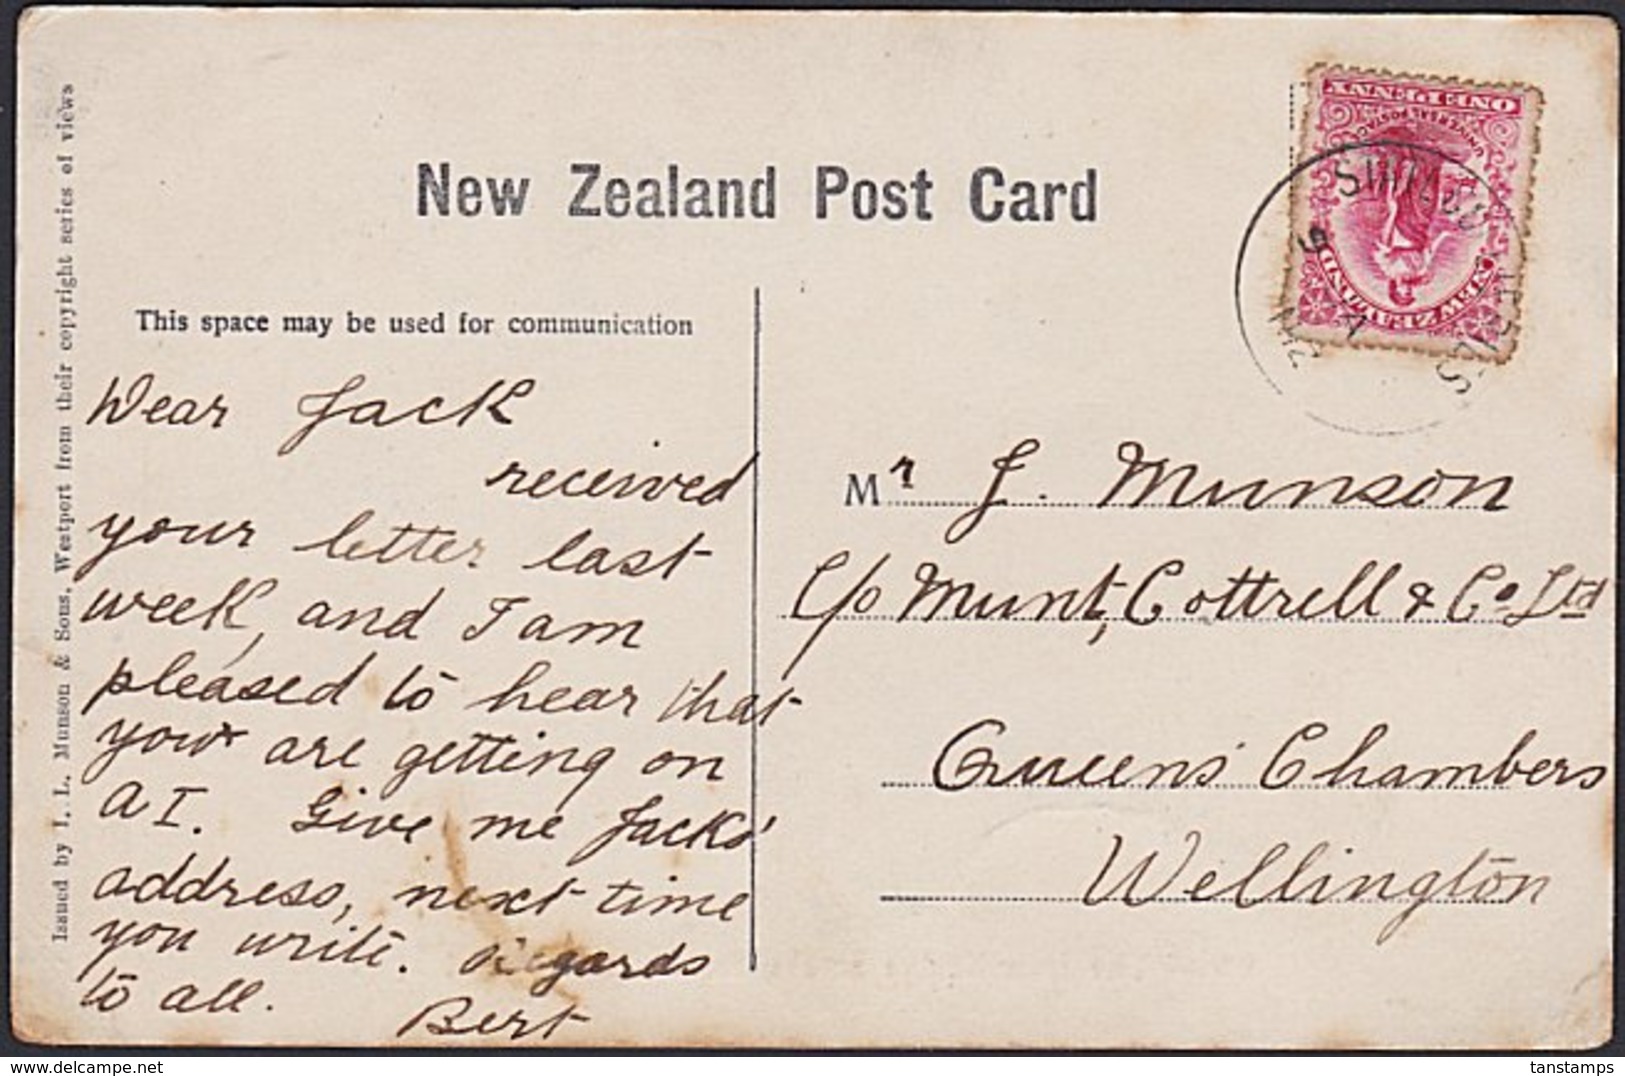 NEW ZEALAND POSTCARD RARE EARLY STATE COLLIERIES POSTMARK - Covers & Documents